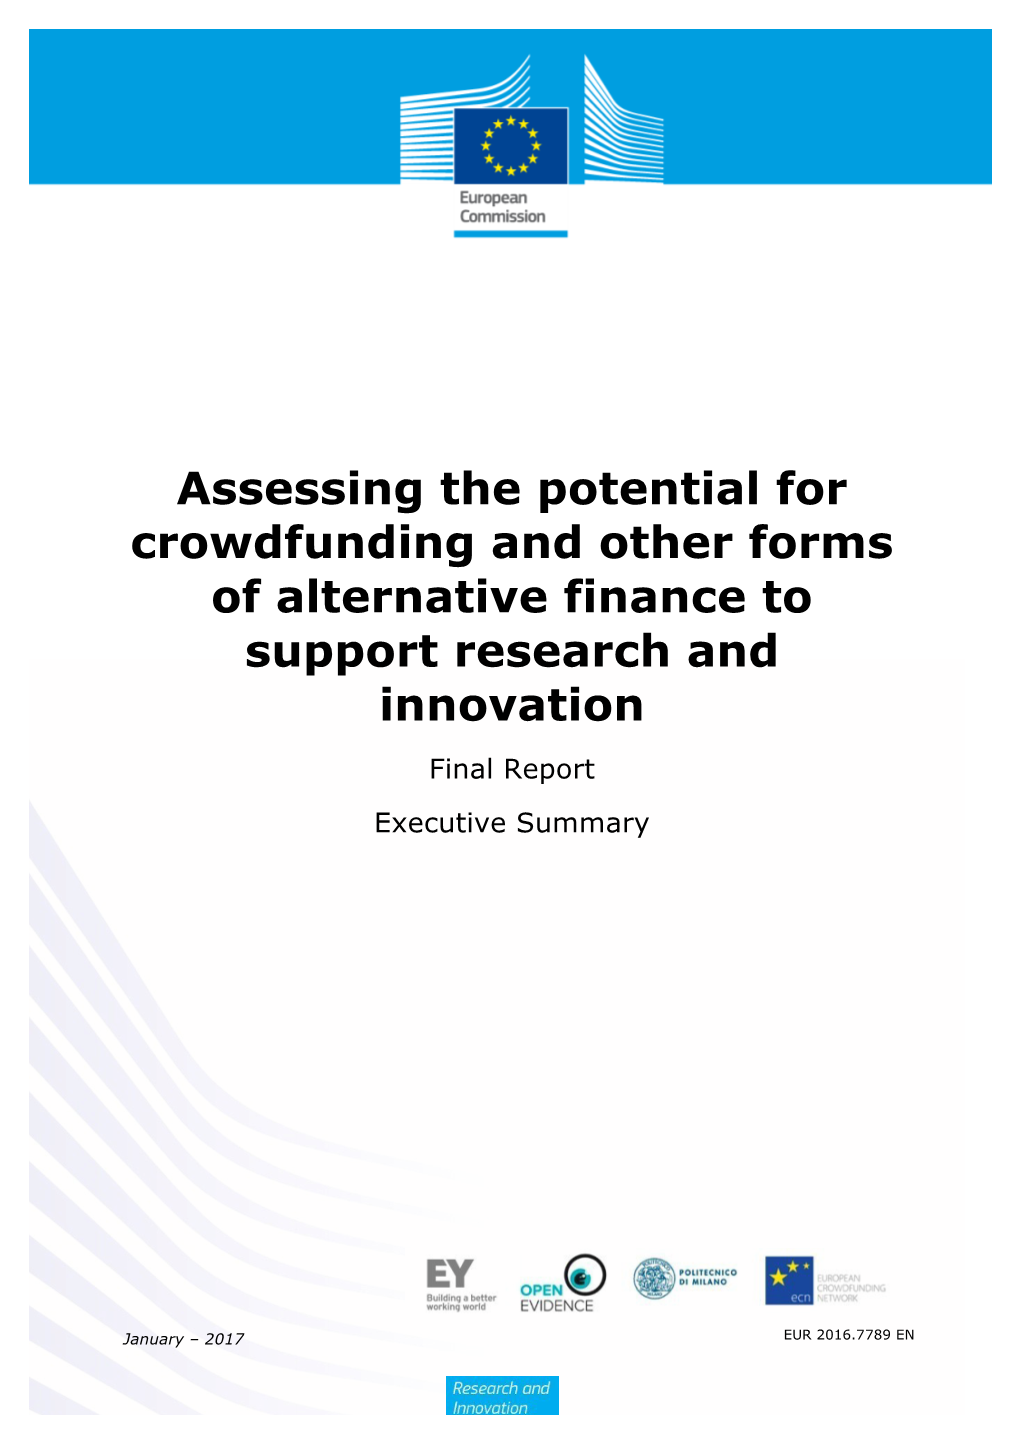 Assessing the Potential for Crowdfunding and Other Forms of Alternative Finance to Support Research and Innovation